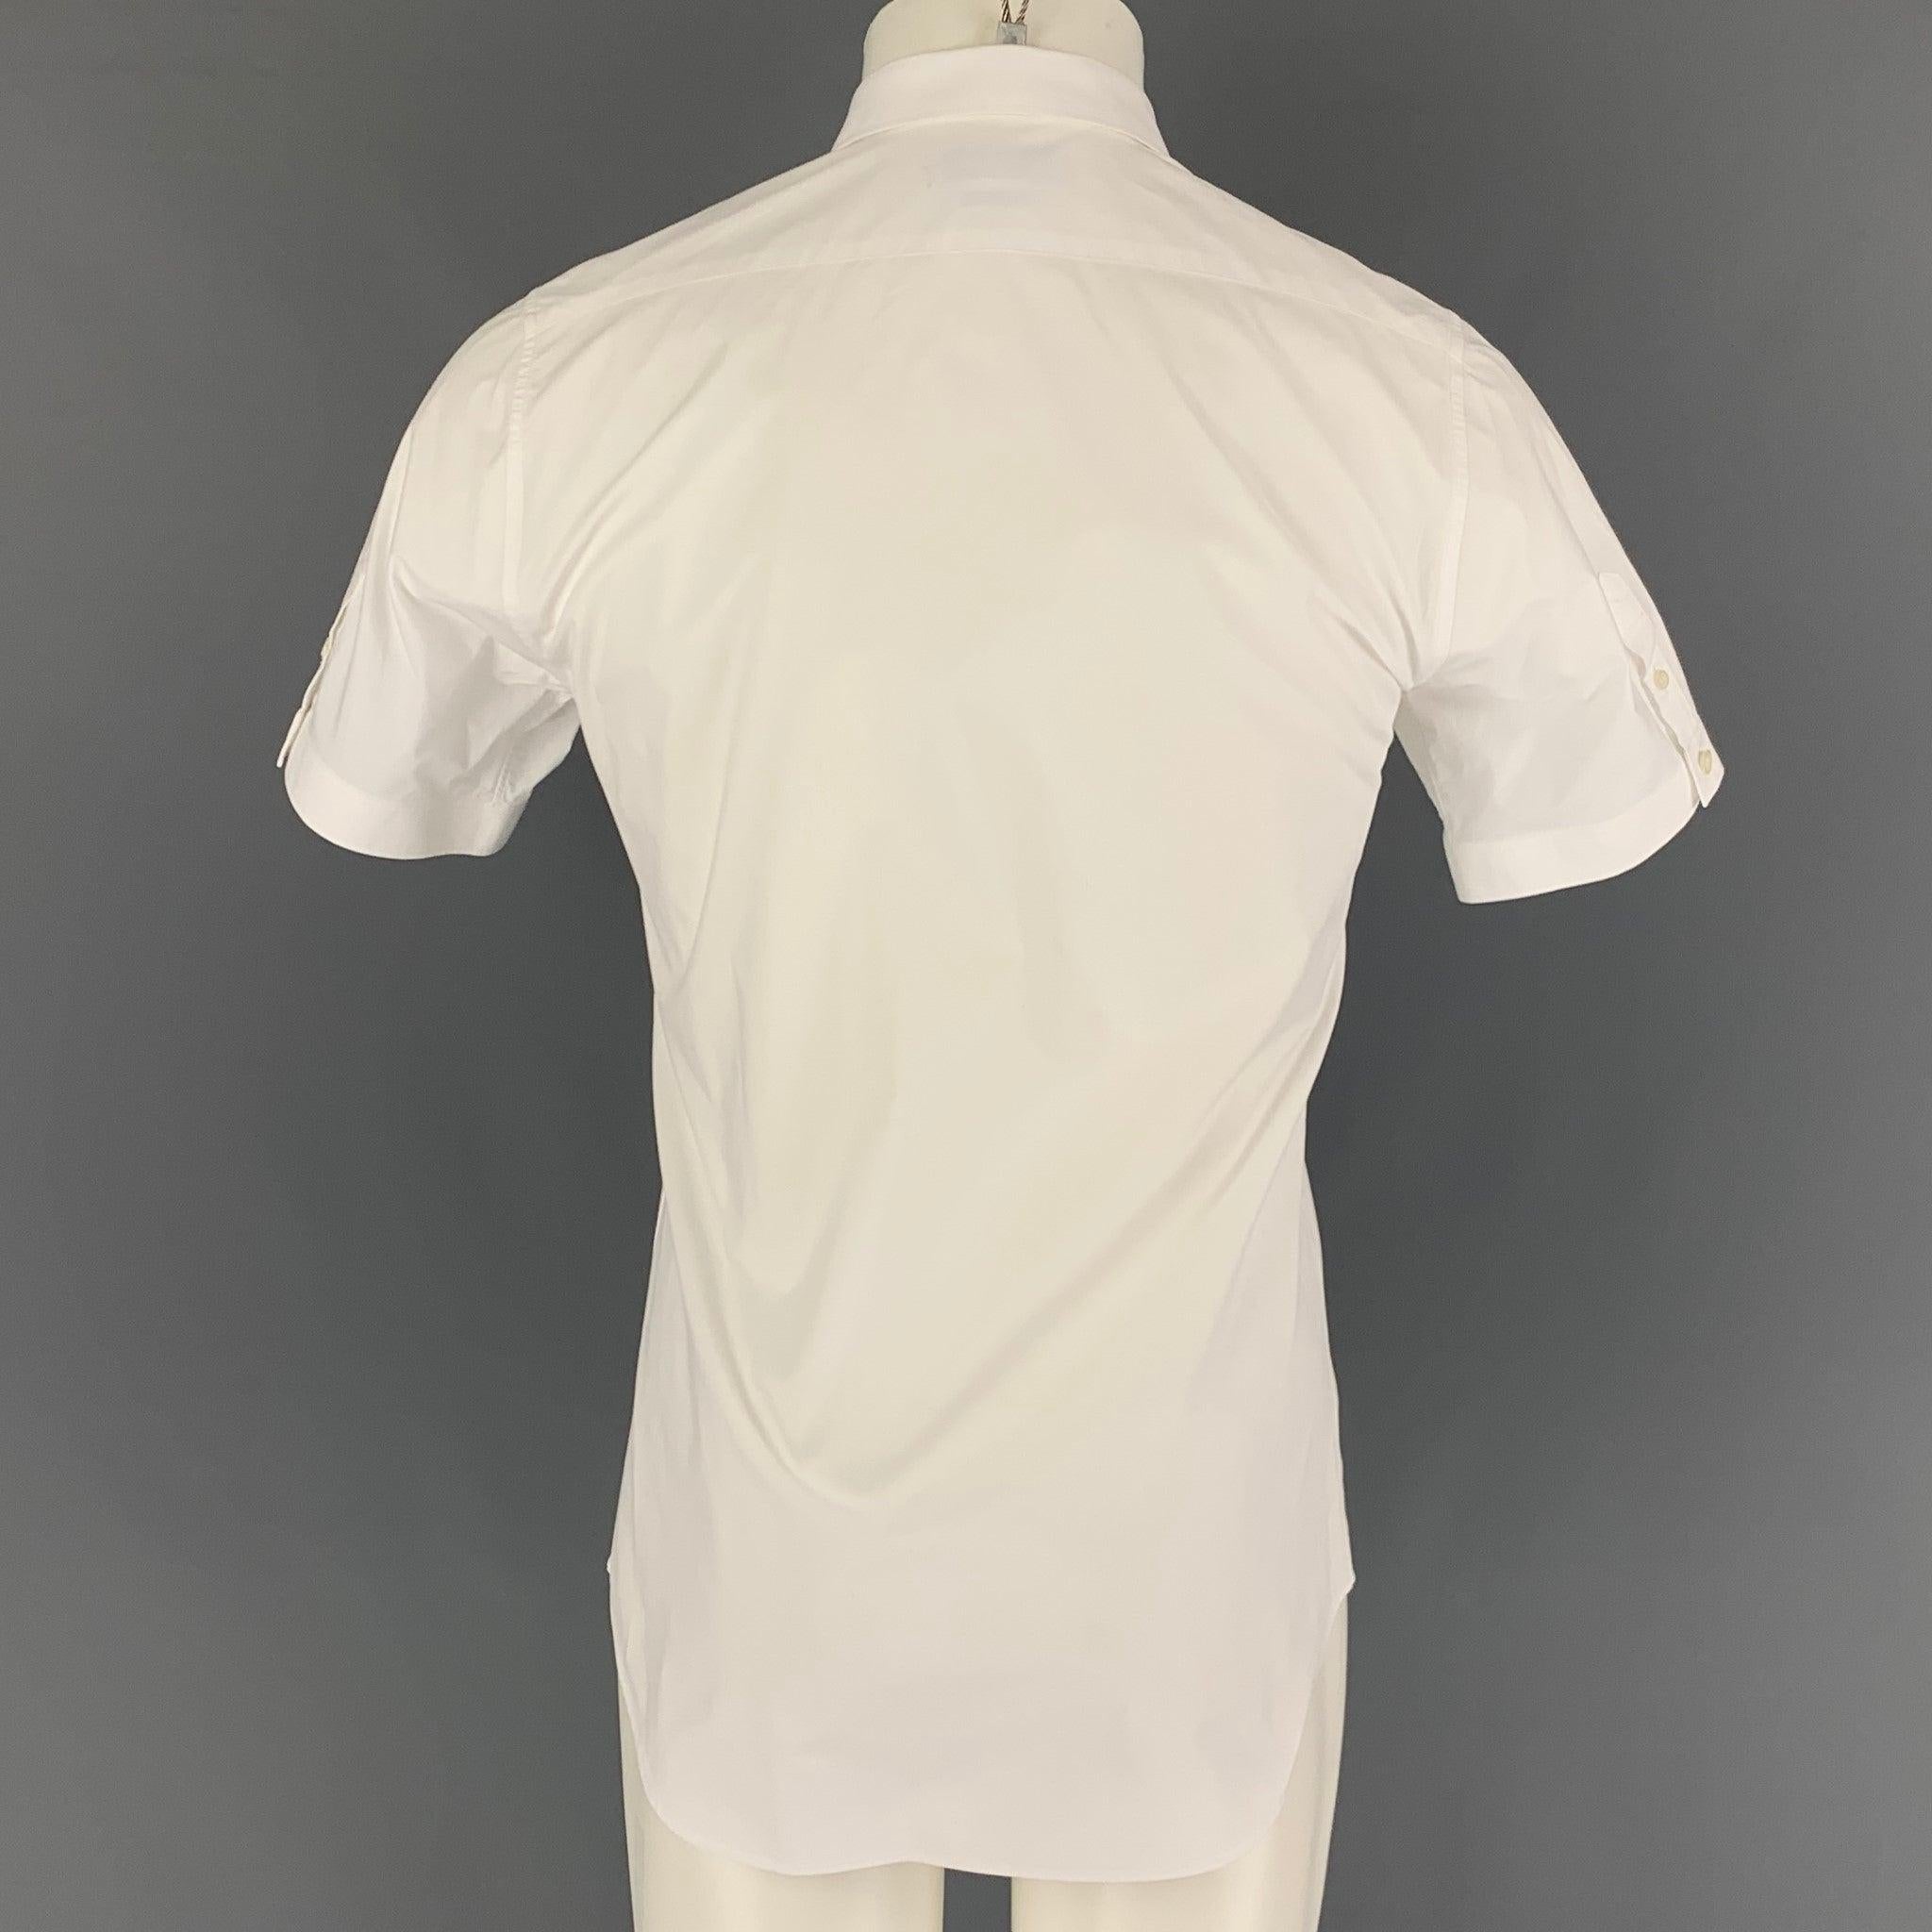 ALEXANDER MCQUEEN Size XS White Cotton Button Up Short Sleeve Shirt In Good Condition For Sale In San Francisco, CA